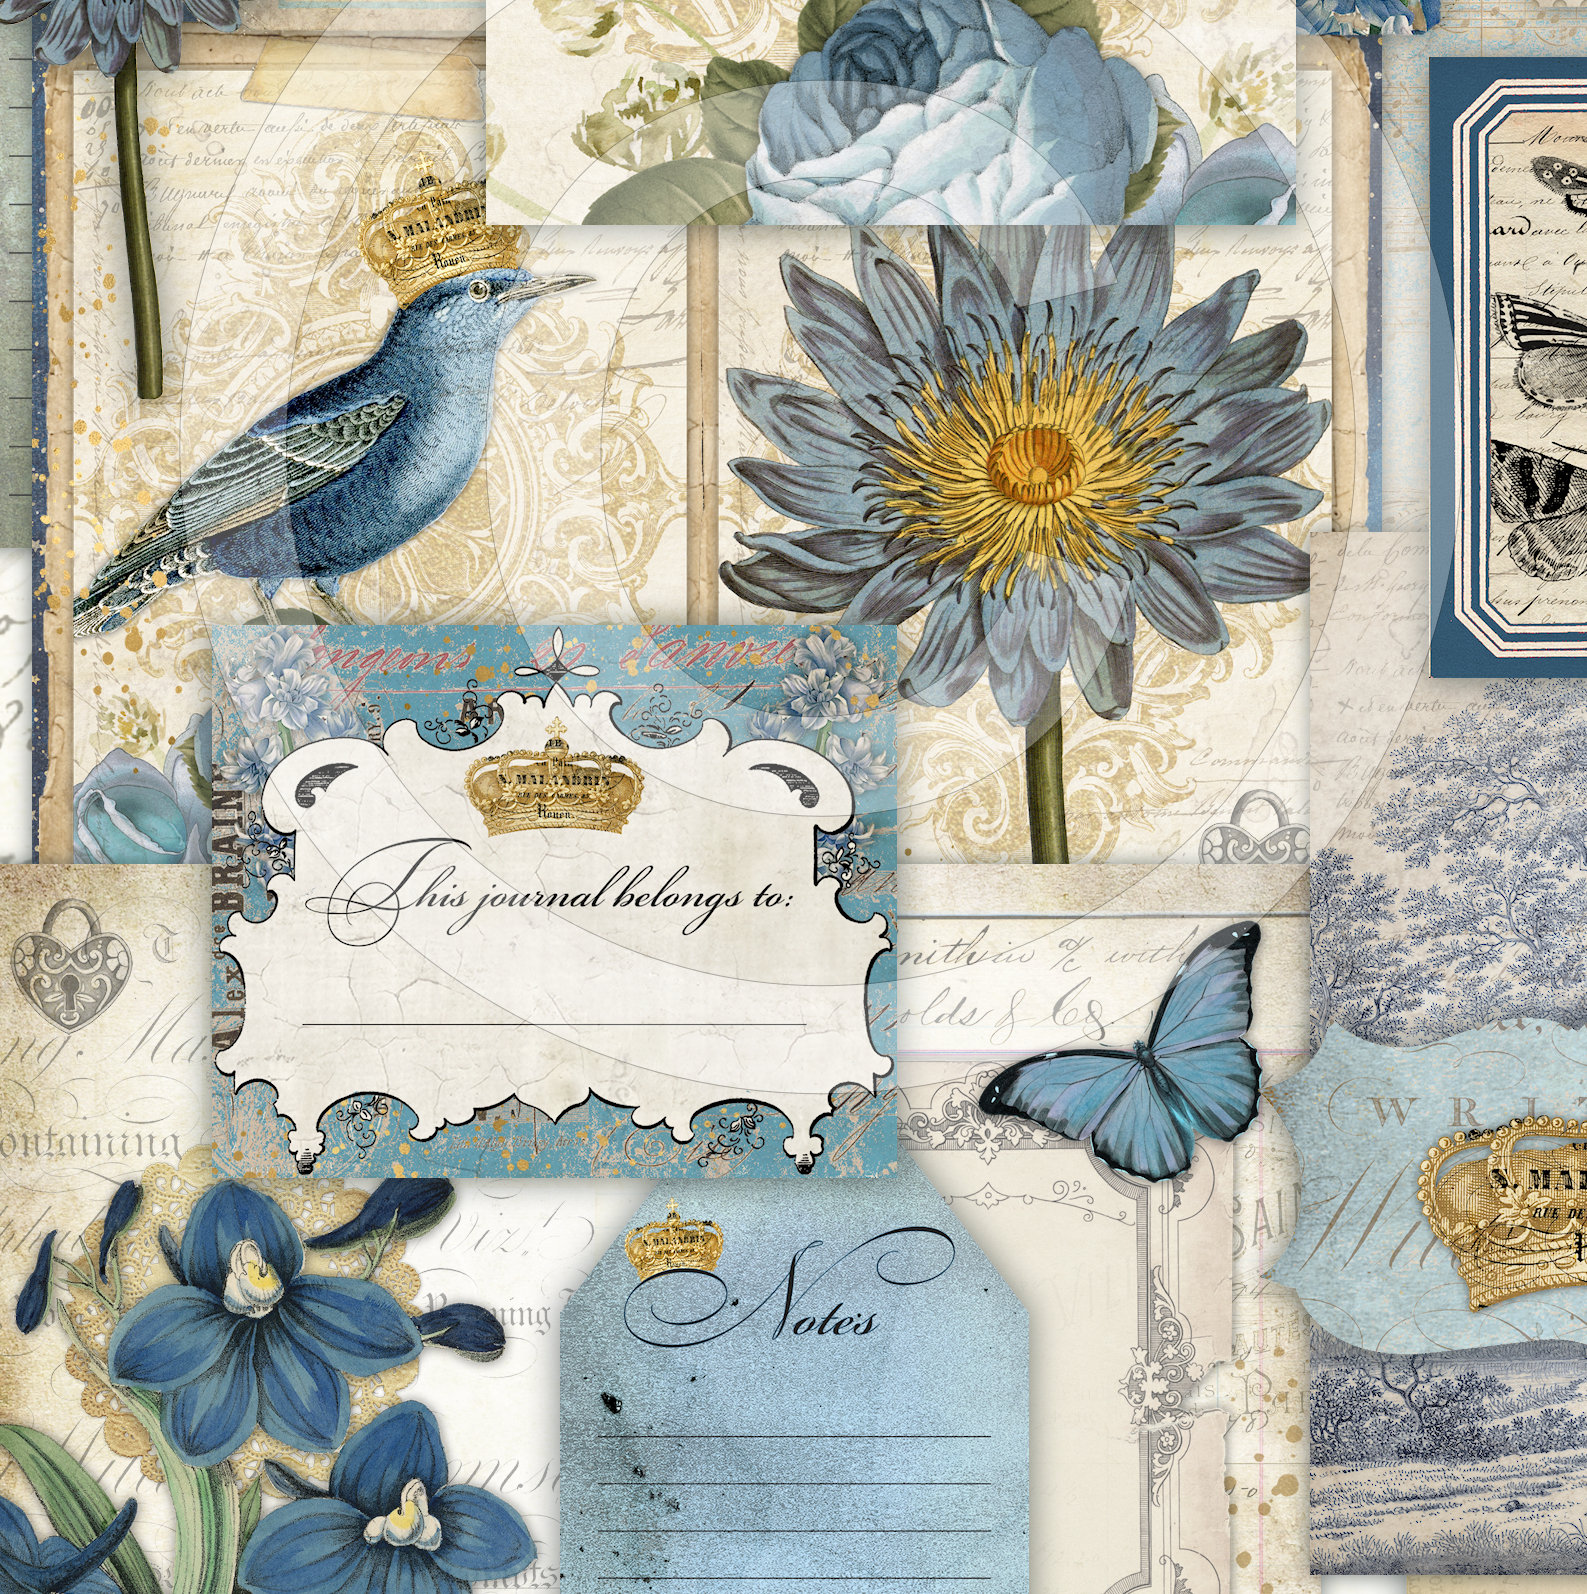 Dreamy BLUE Junk Journal Kit, Printable Journaling Pages, Tags, Pockets,  Butterflies, Fairies, Vintage Ephemera, Digital Collage Sheets 